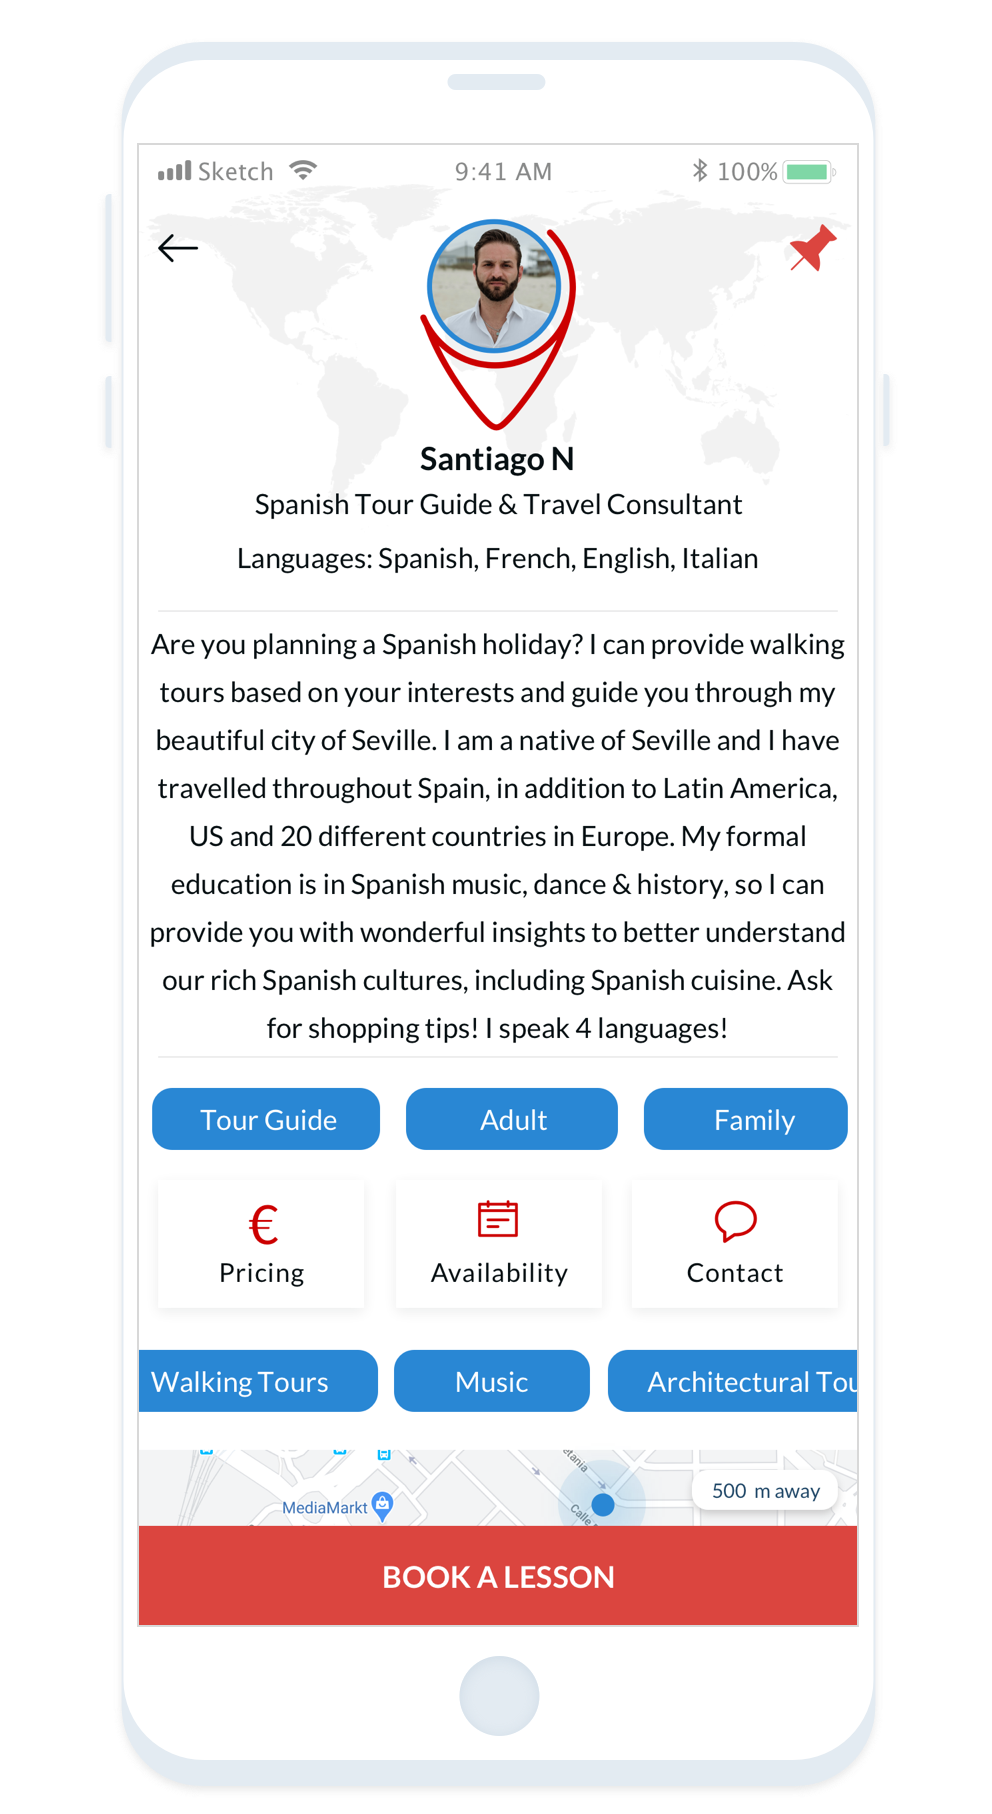 Are you looking for Spanish tutoring jobs? Easily find students on Tutor Around App. Connect online or in person.